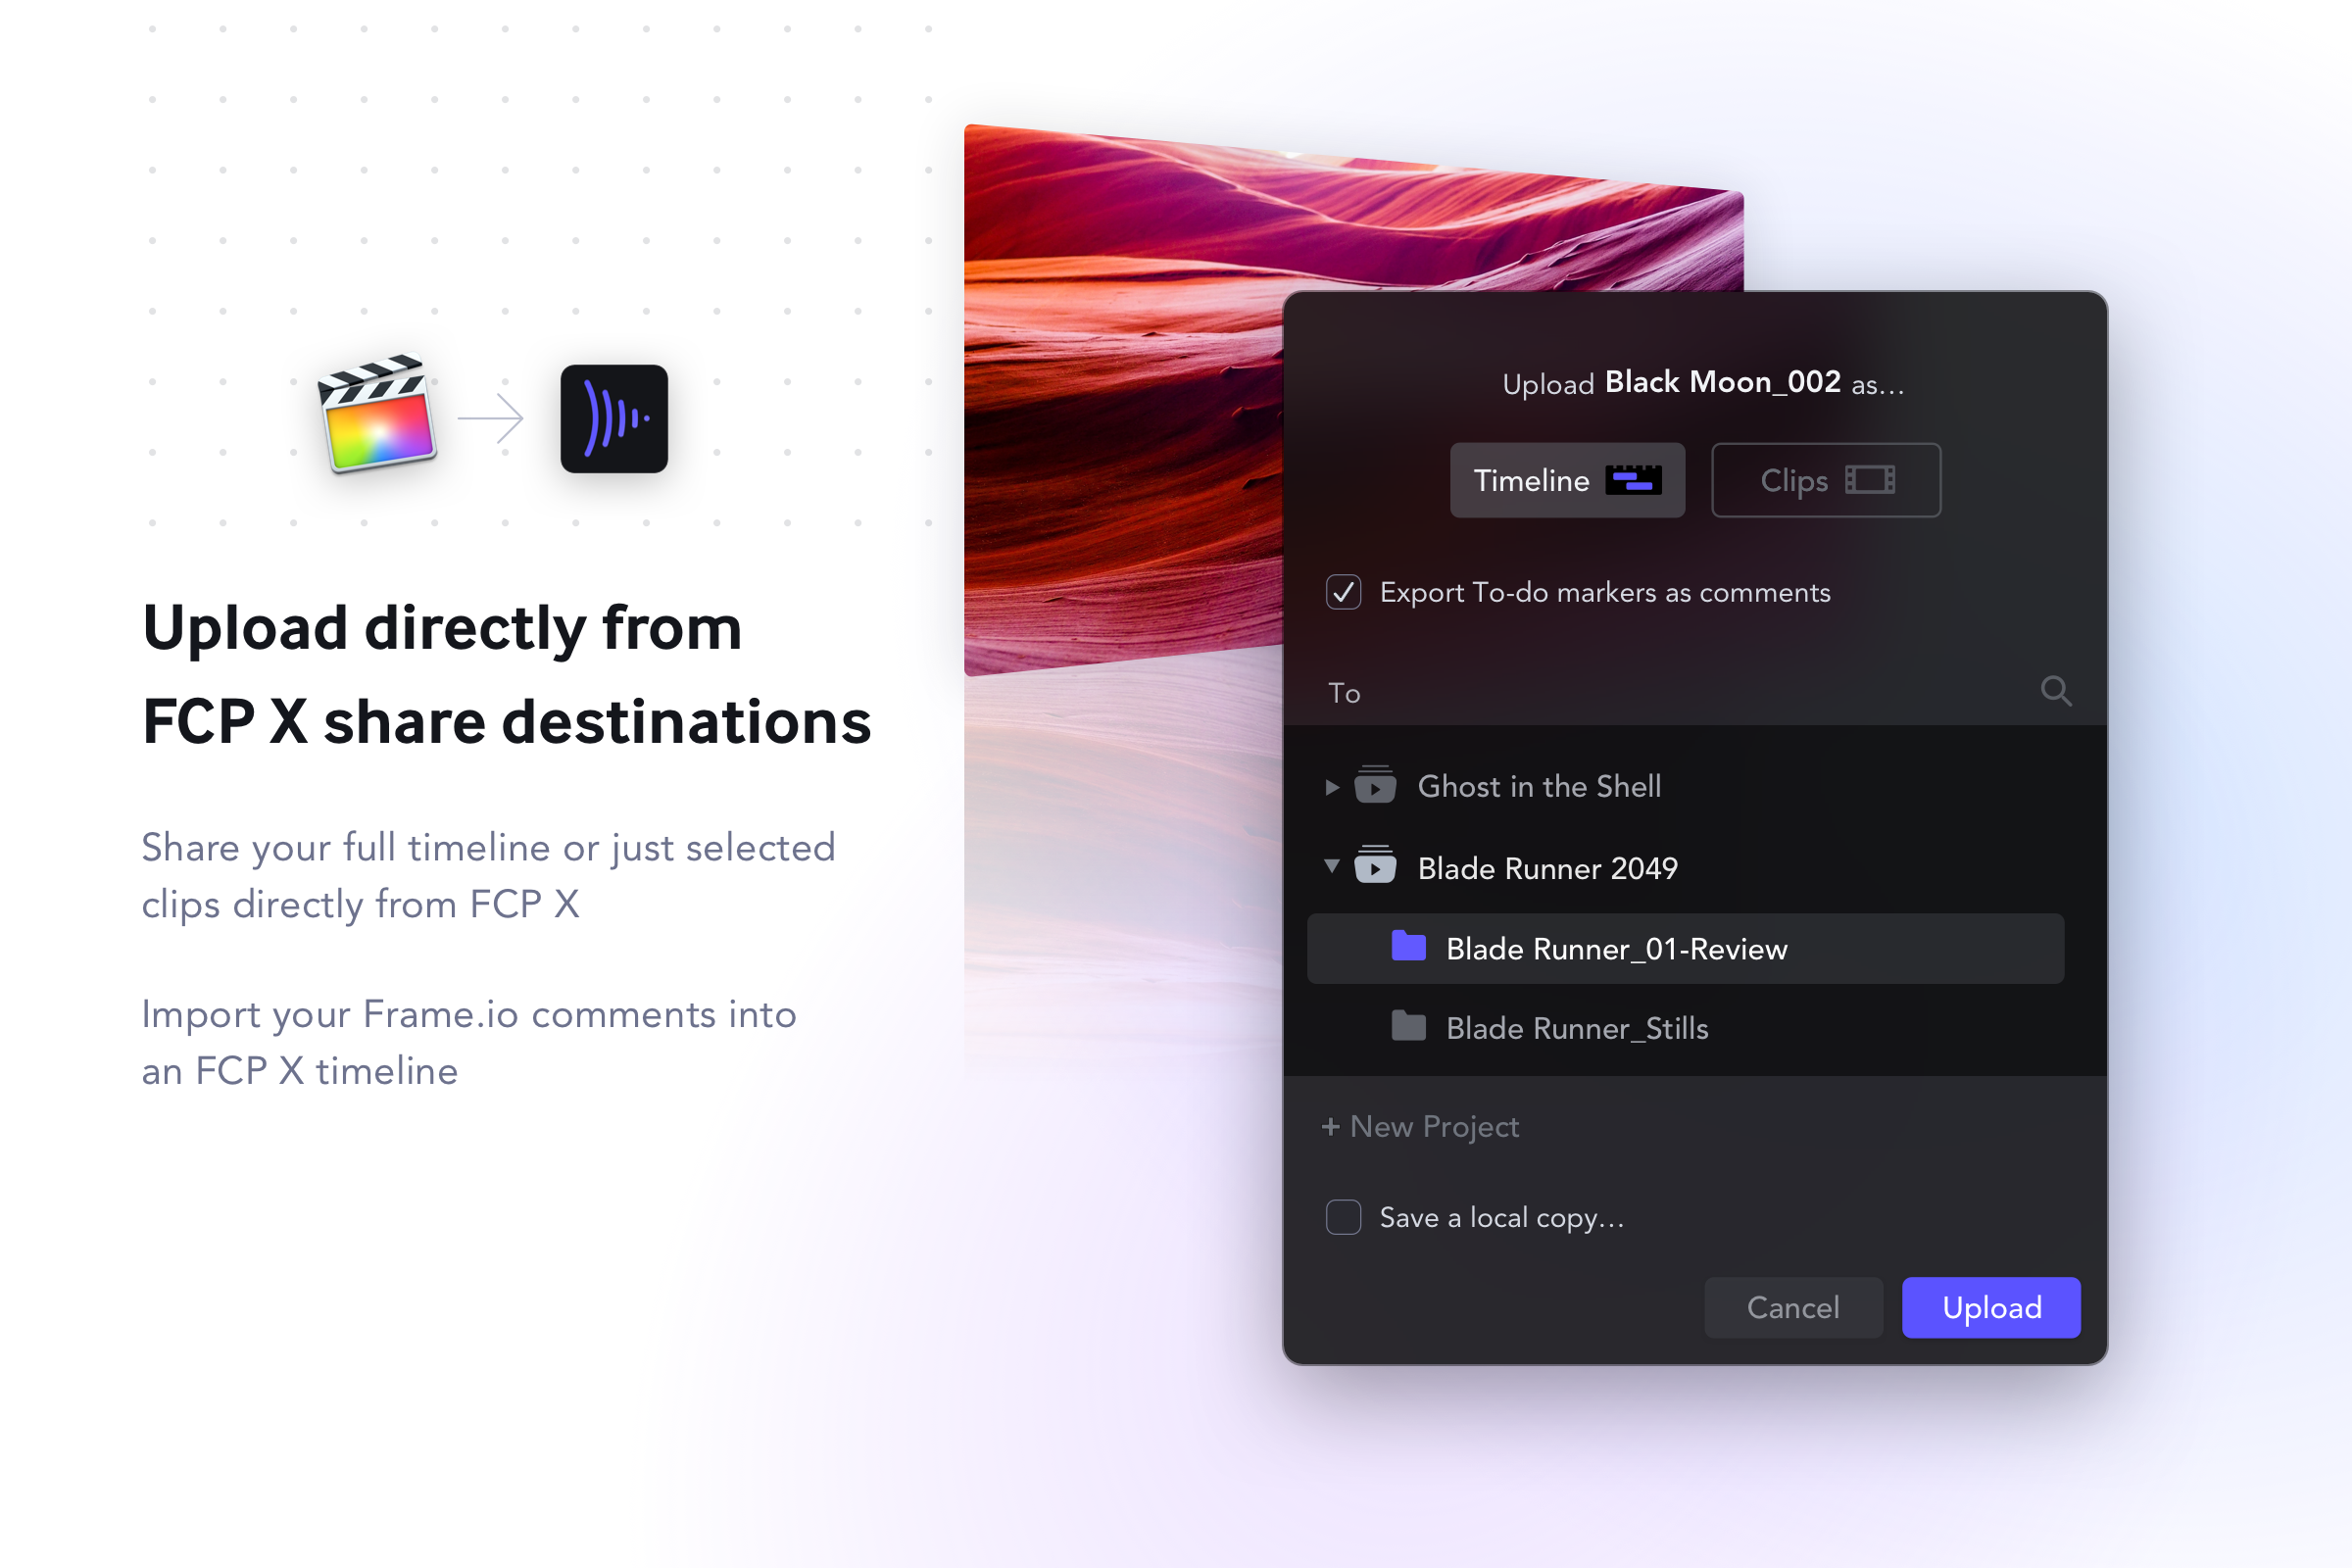 Upload directly from FCP X share destinations.